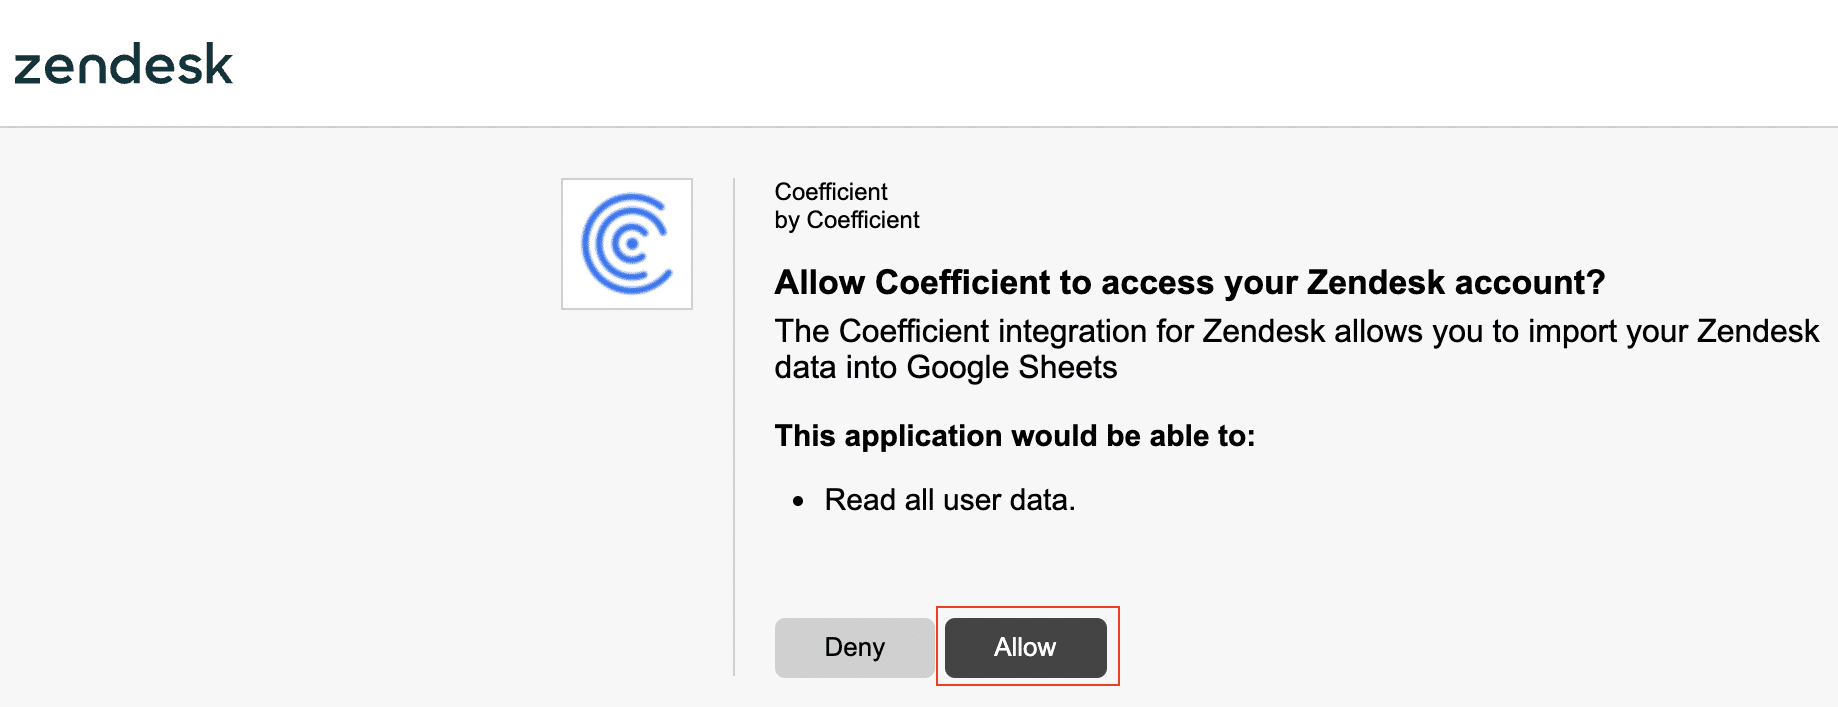 Scrolling and clicking 'Connect' beside the Zendesk option in Coefficient 